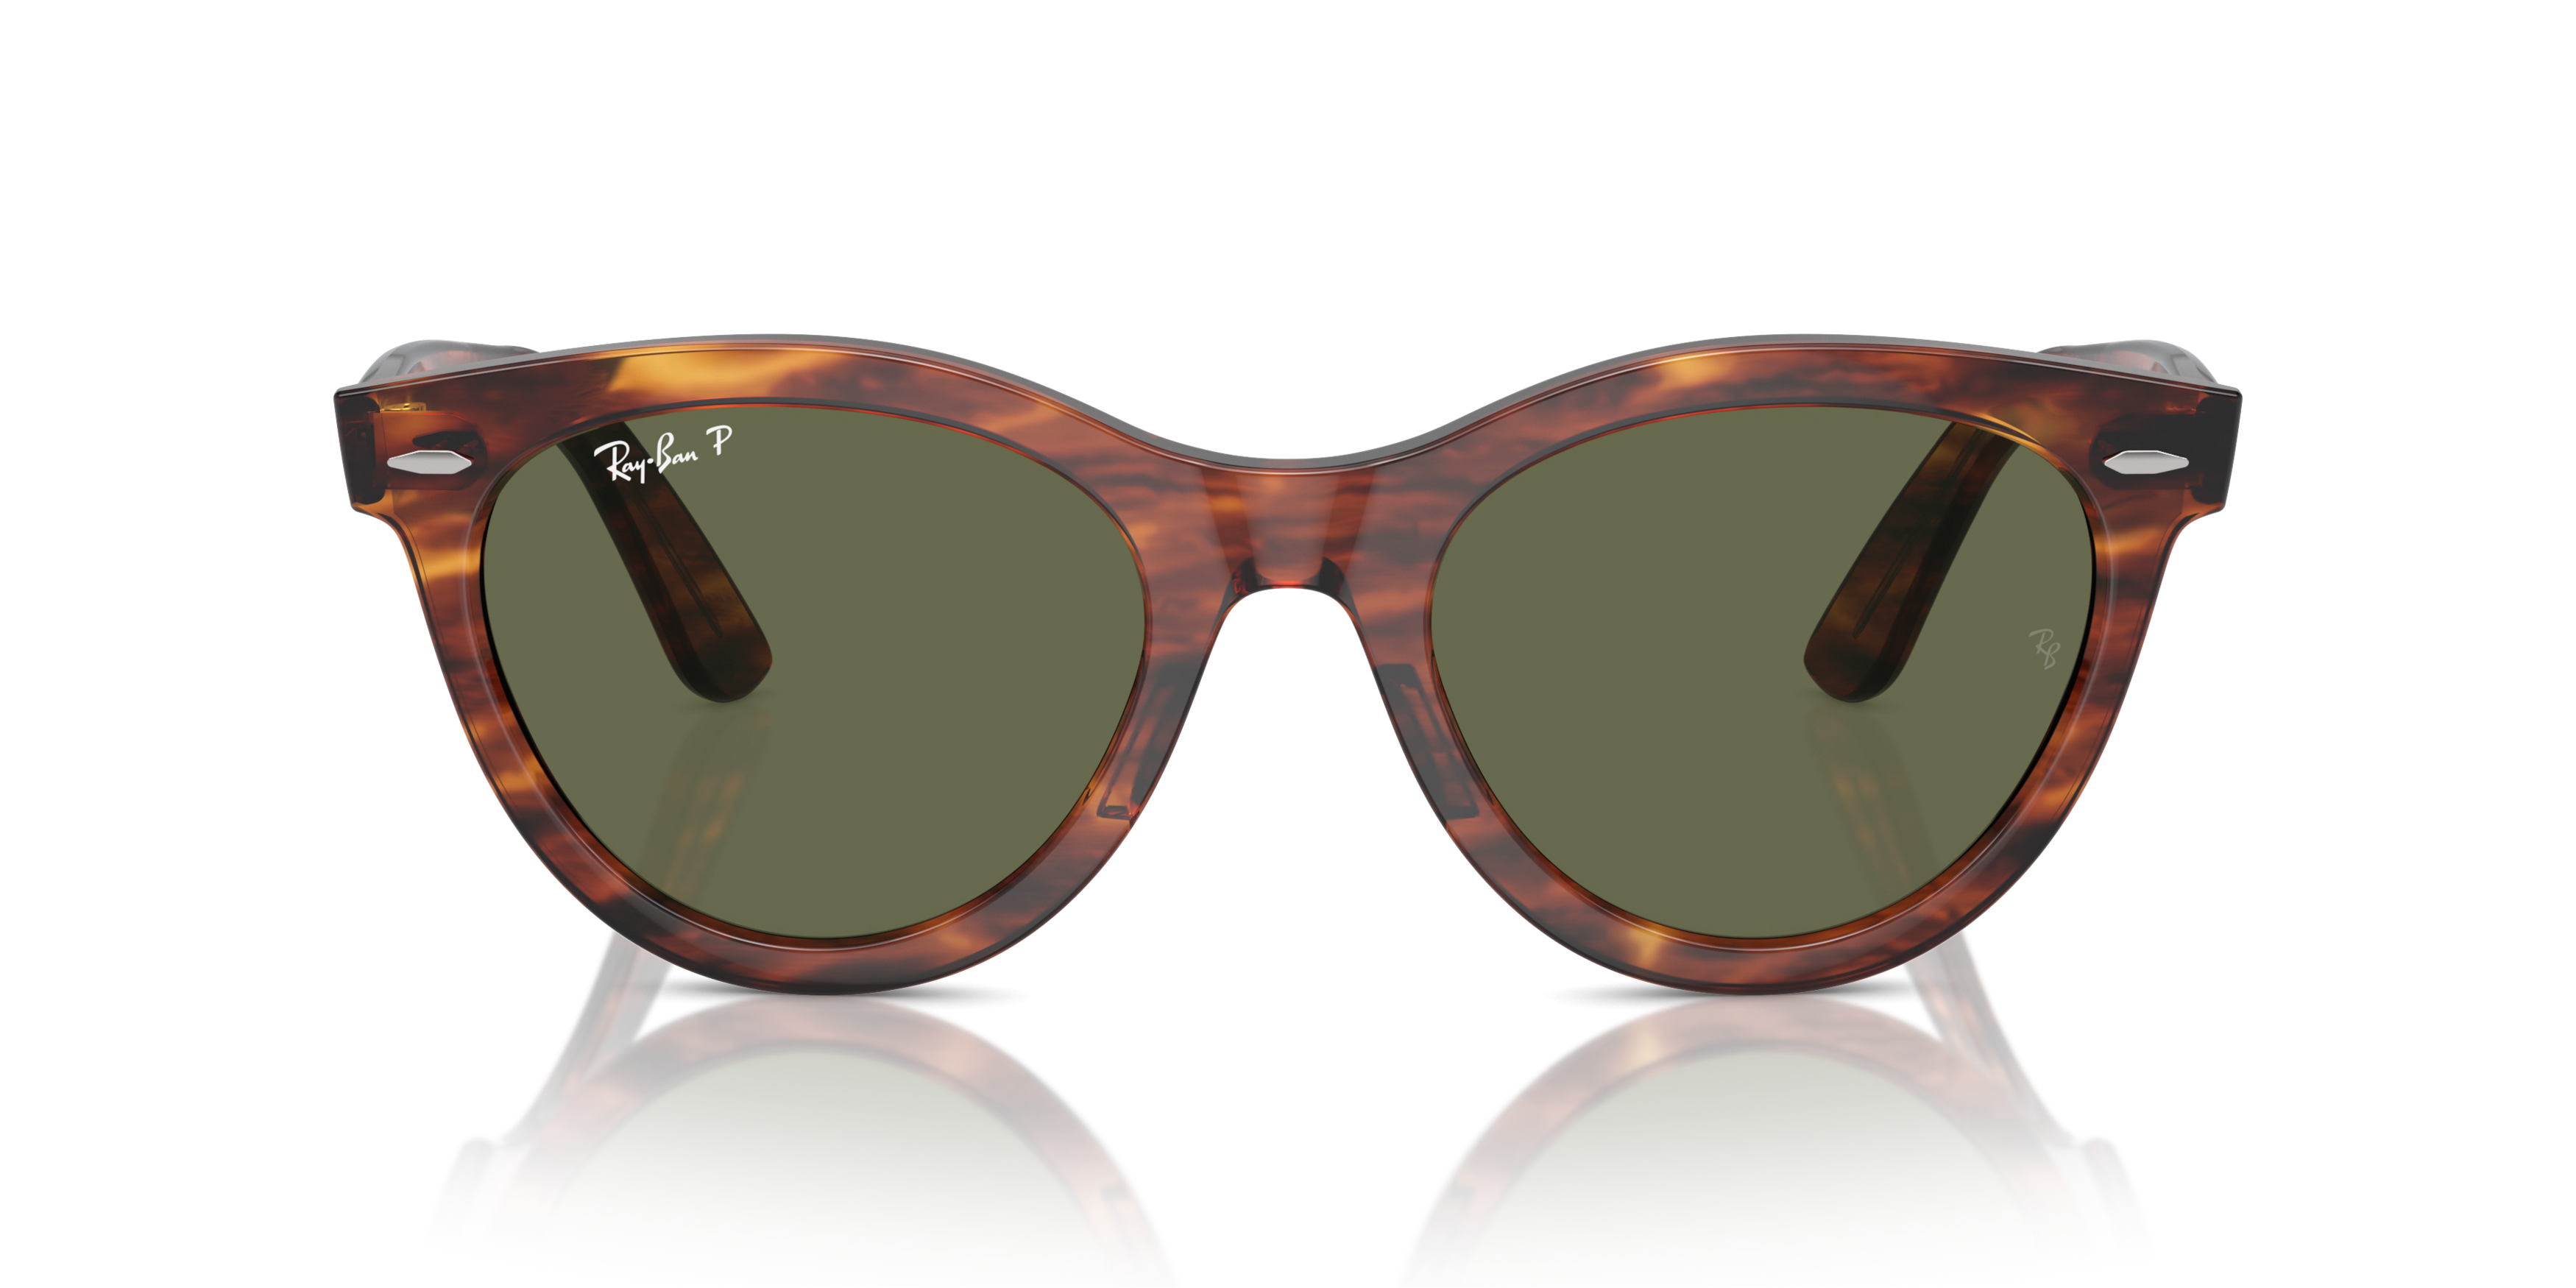 [products.image.front] Ray-Ban Wayfarer Way RB 2241 Sunglasses